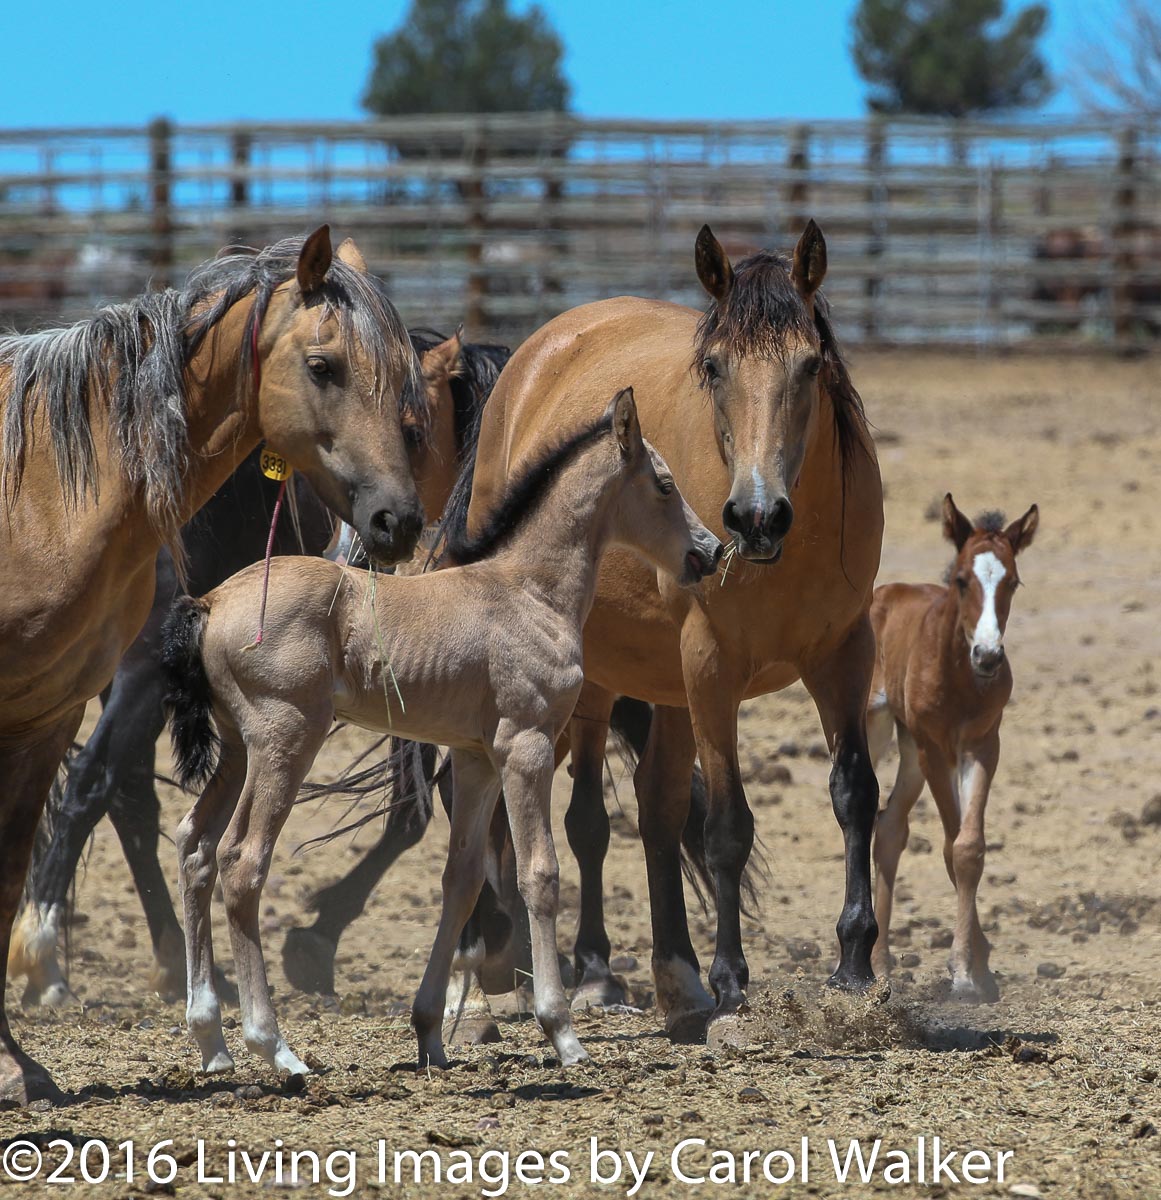 Mares and foals at the Hines facility